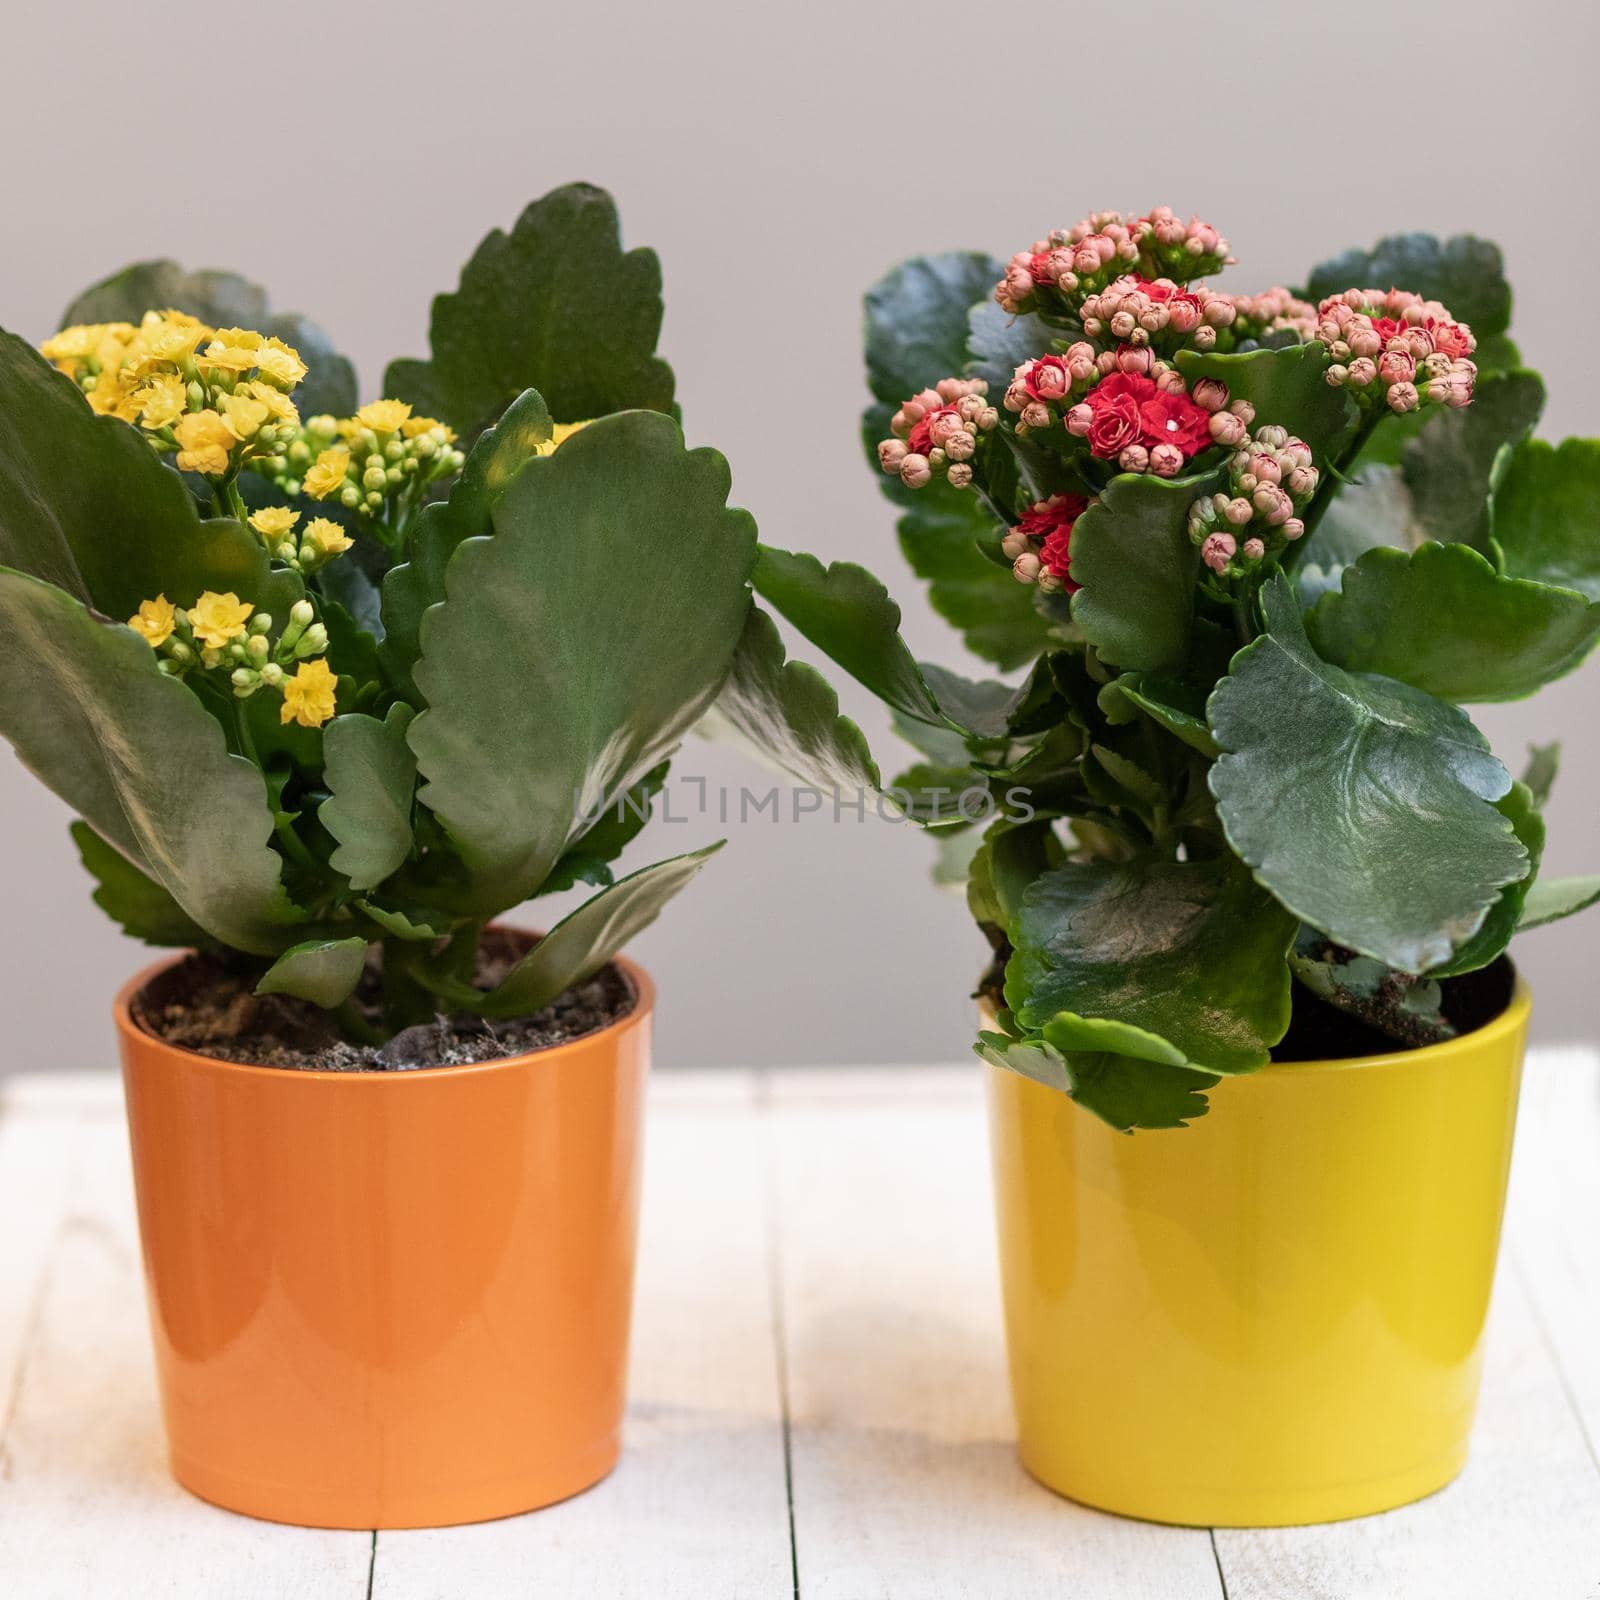 Colorful Widow's-thrill, Kalanchoe flowers by ferhad